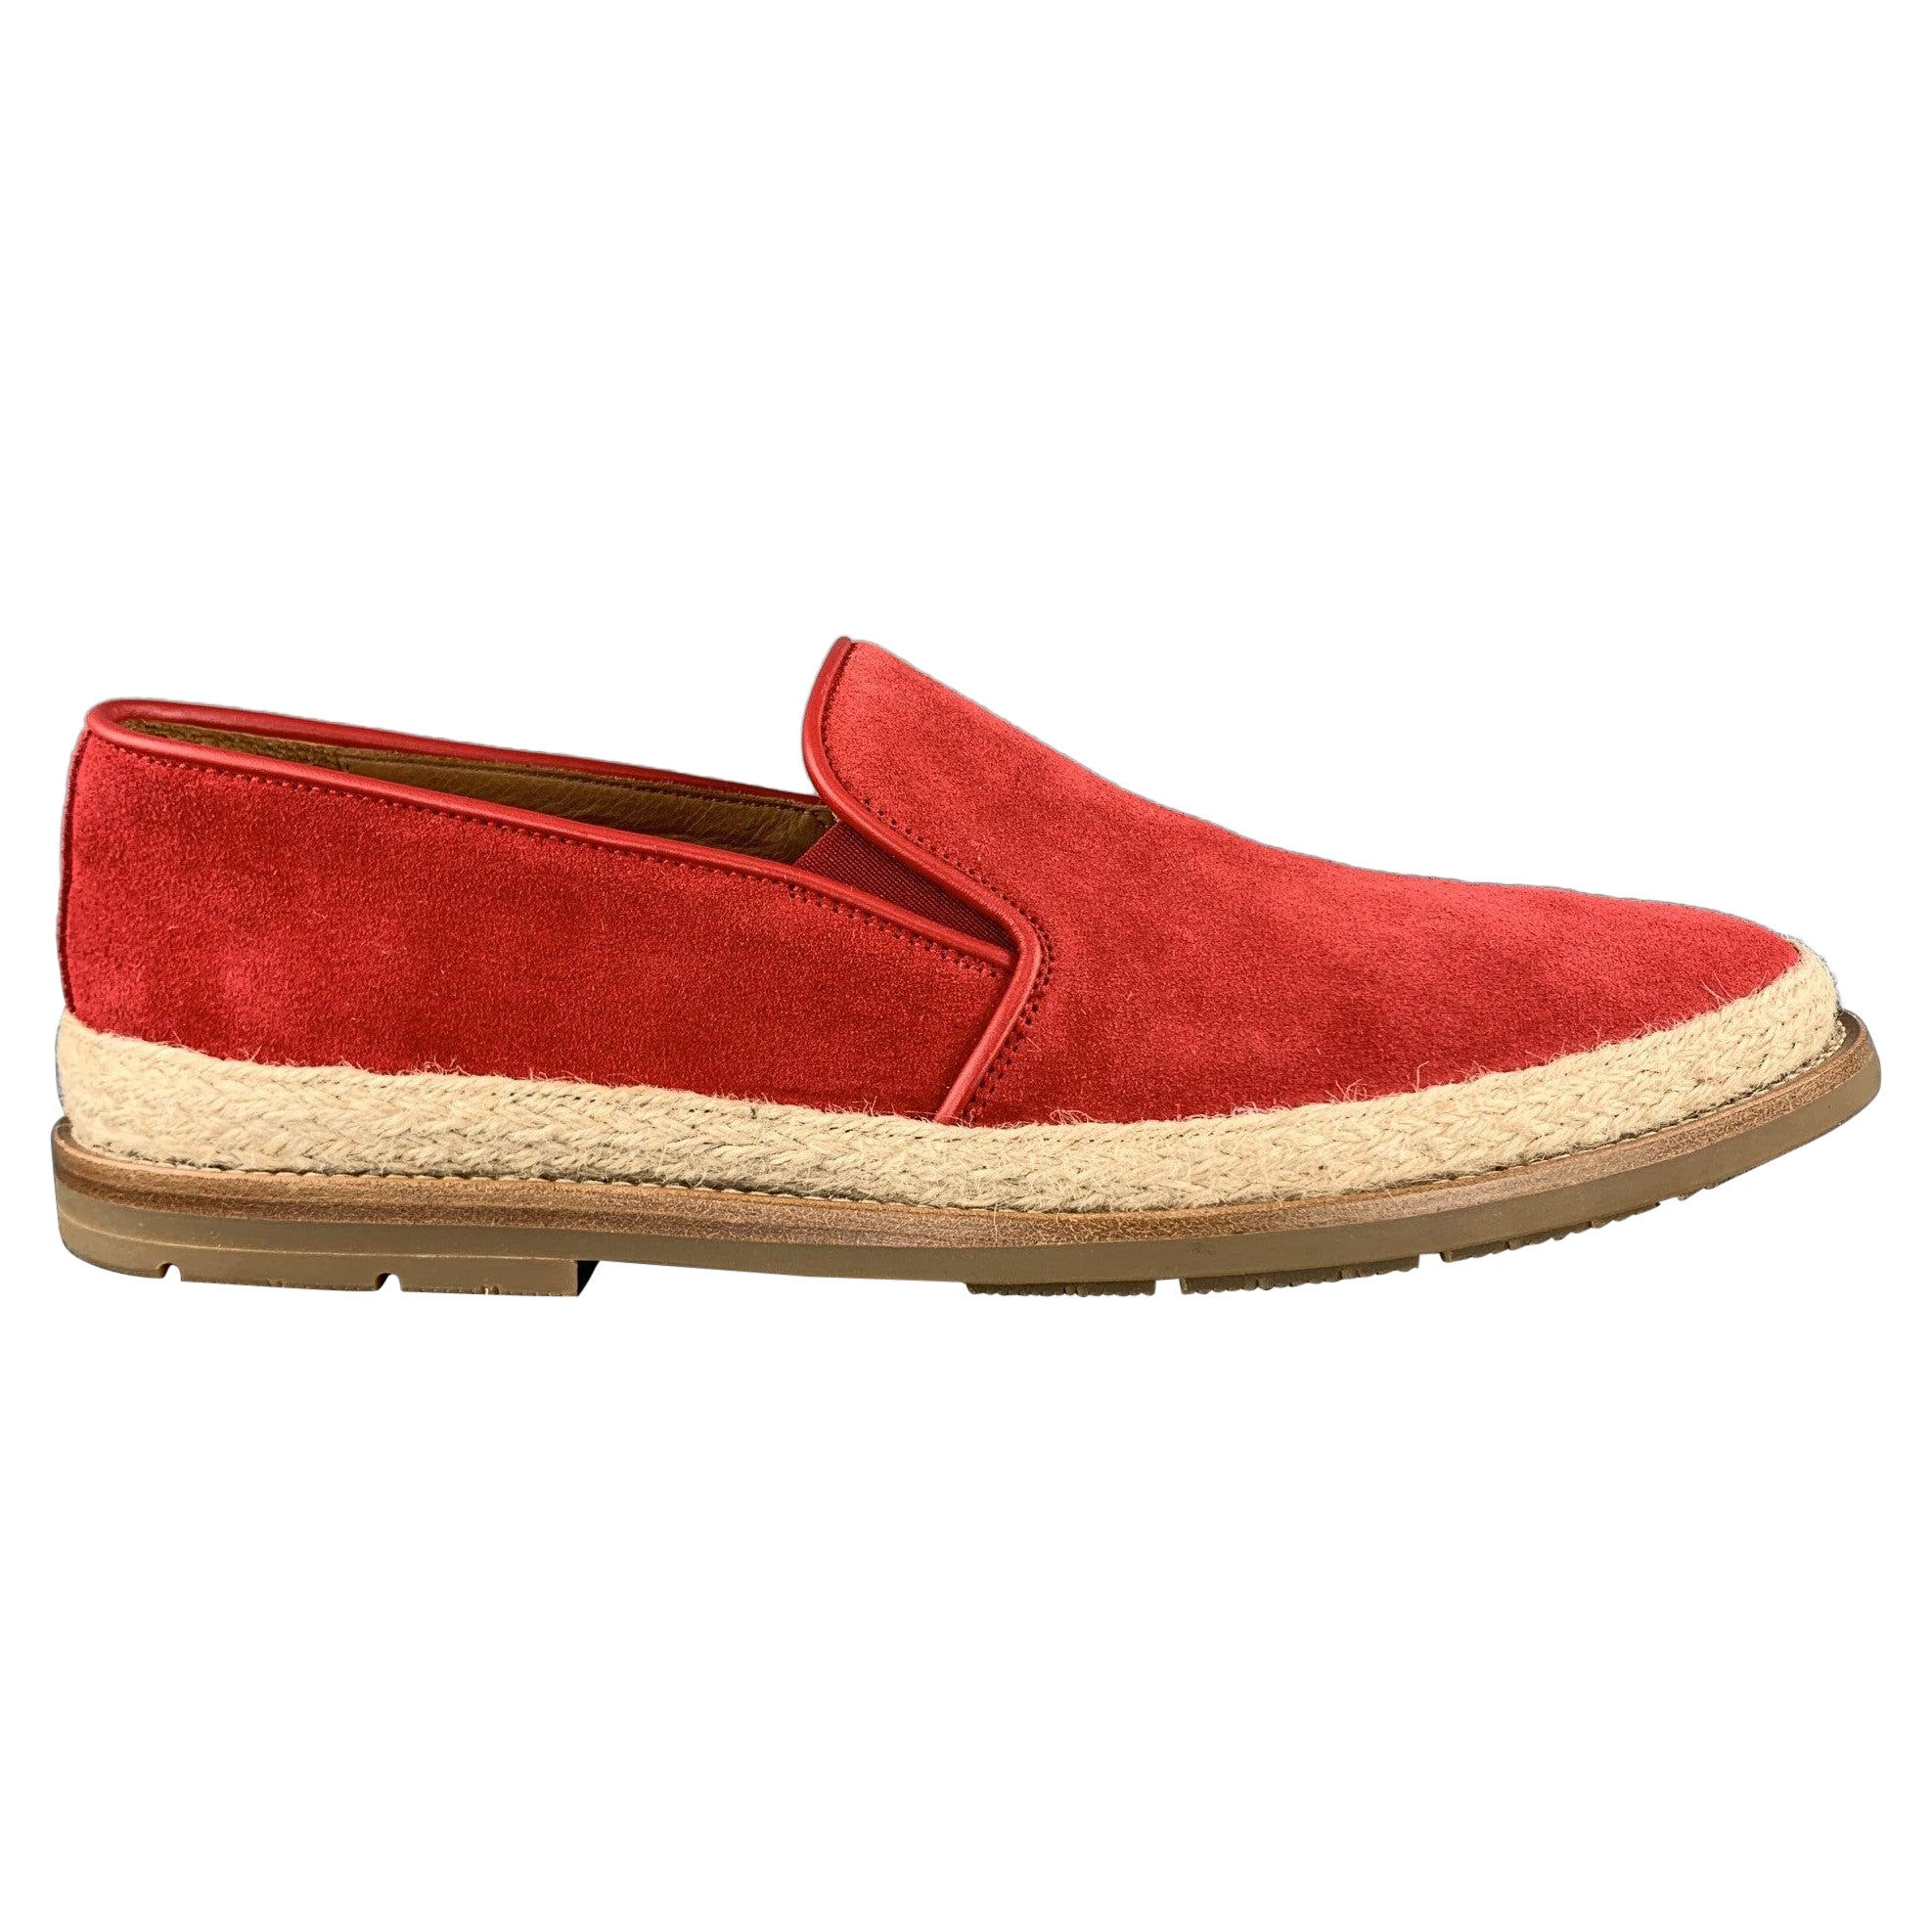 AQUATALIA Size 11 Red Suede Braided Trim Rubber Sole Loafers For Sale